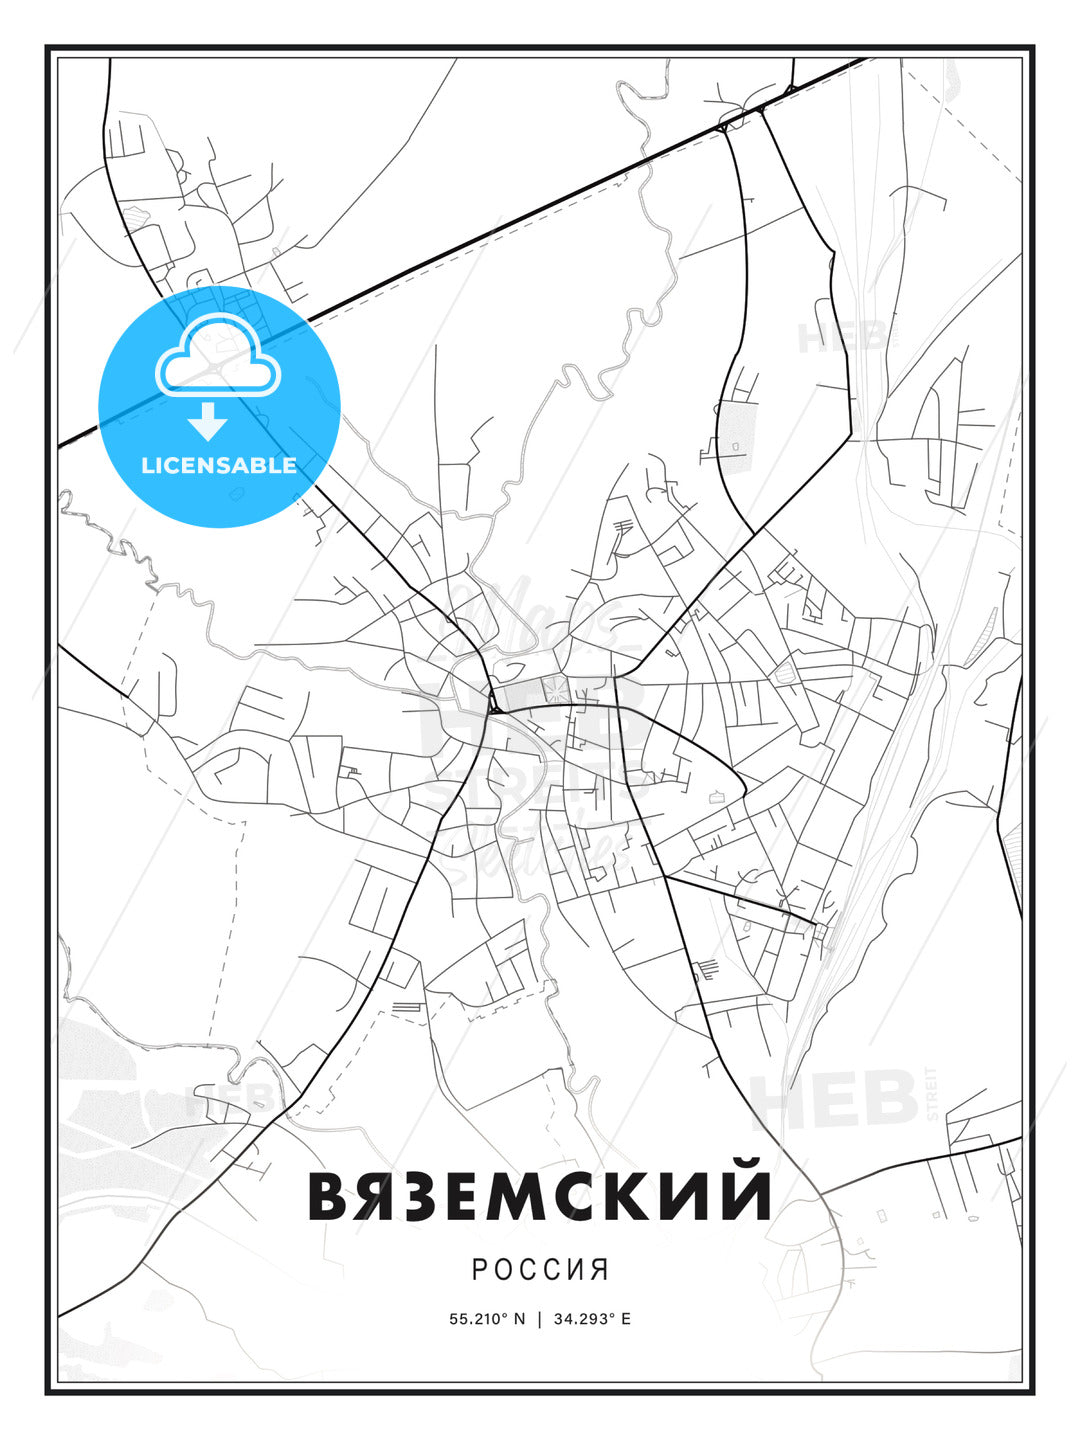 ВЯЗЕМСКИЙ / Vyazma, Russia, Modern Print Template in Various Formats - HEBSTREITS Sketches